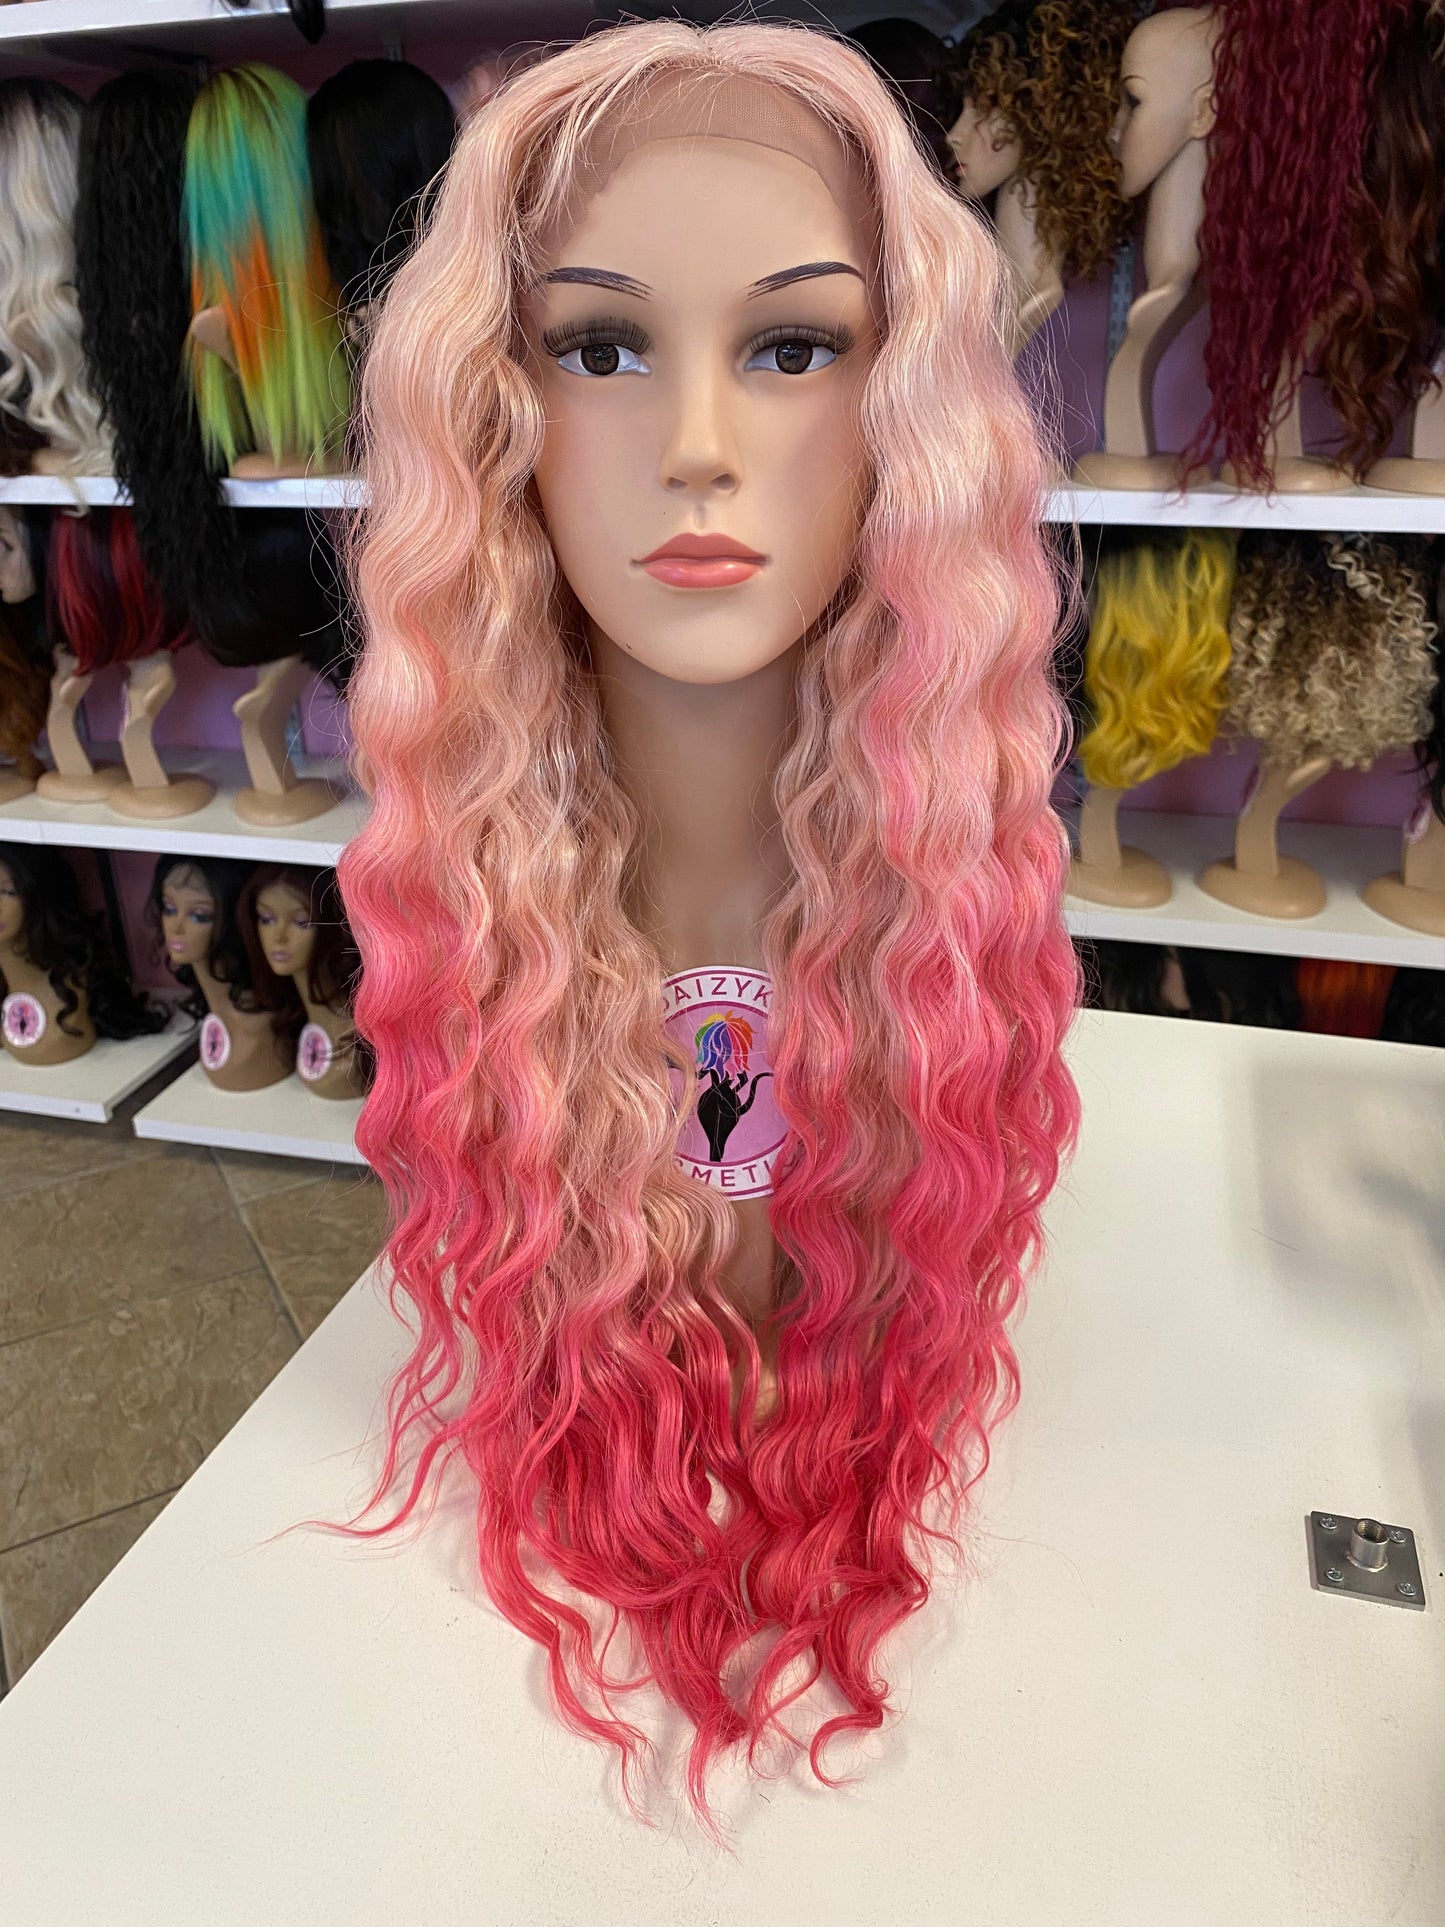 Marina - Middle Part Lace Front Wig - PINK FADE - DaizyKat Cosmetics Marina - Middle Part Lace Front Wig - PINK FADE DaizyKat Cosmetics Wigs